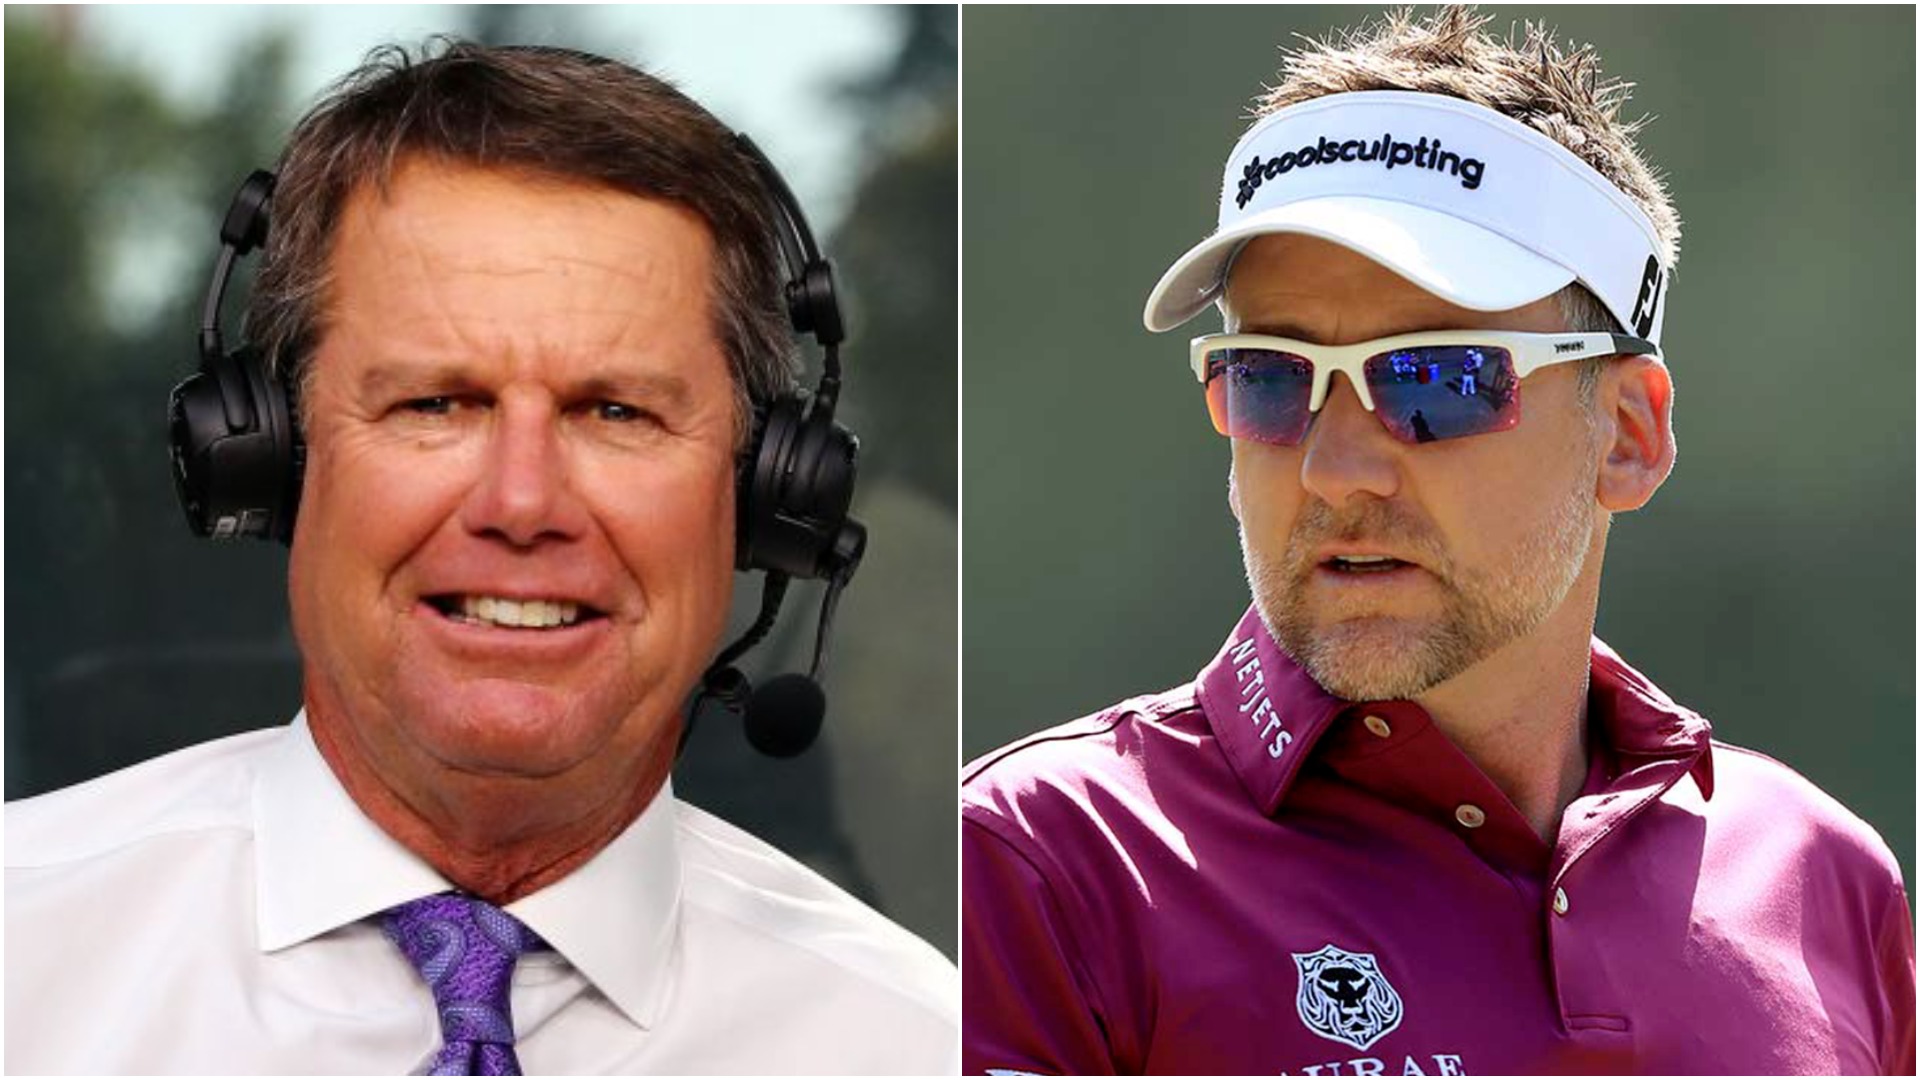 Paul Azinger responds to Ian Poulter's disgusted tweet...